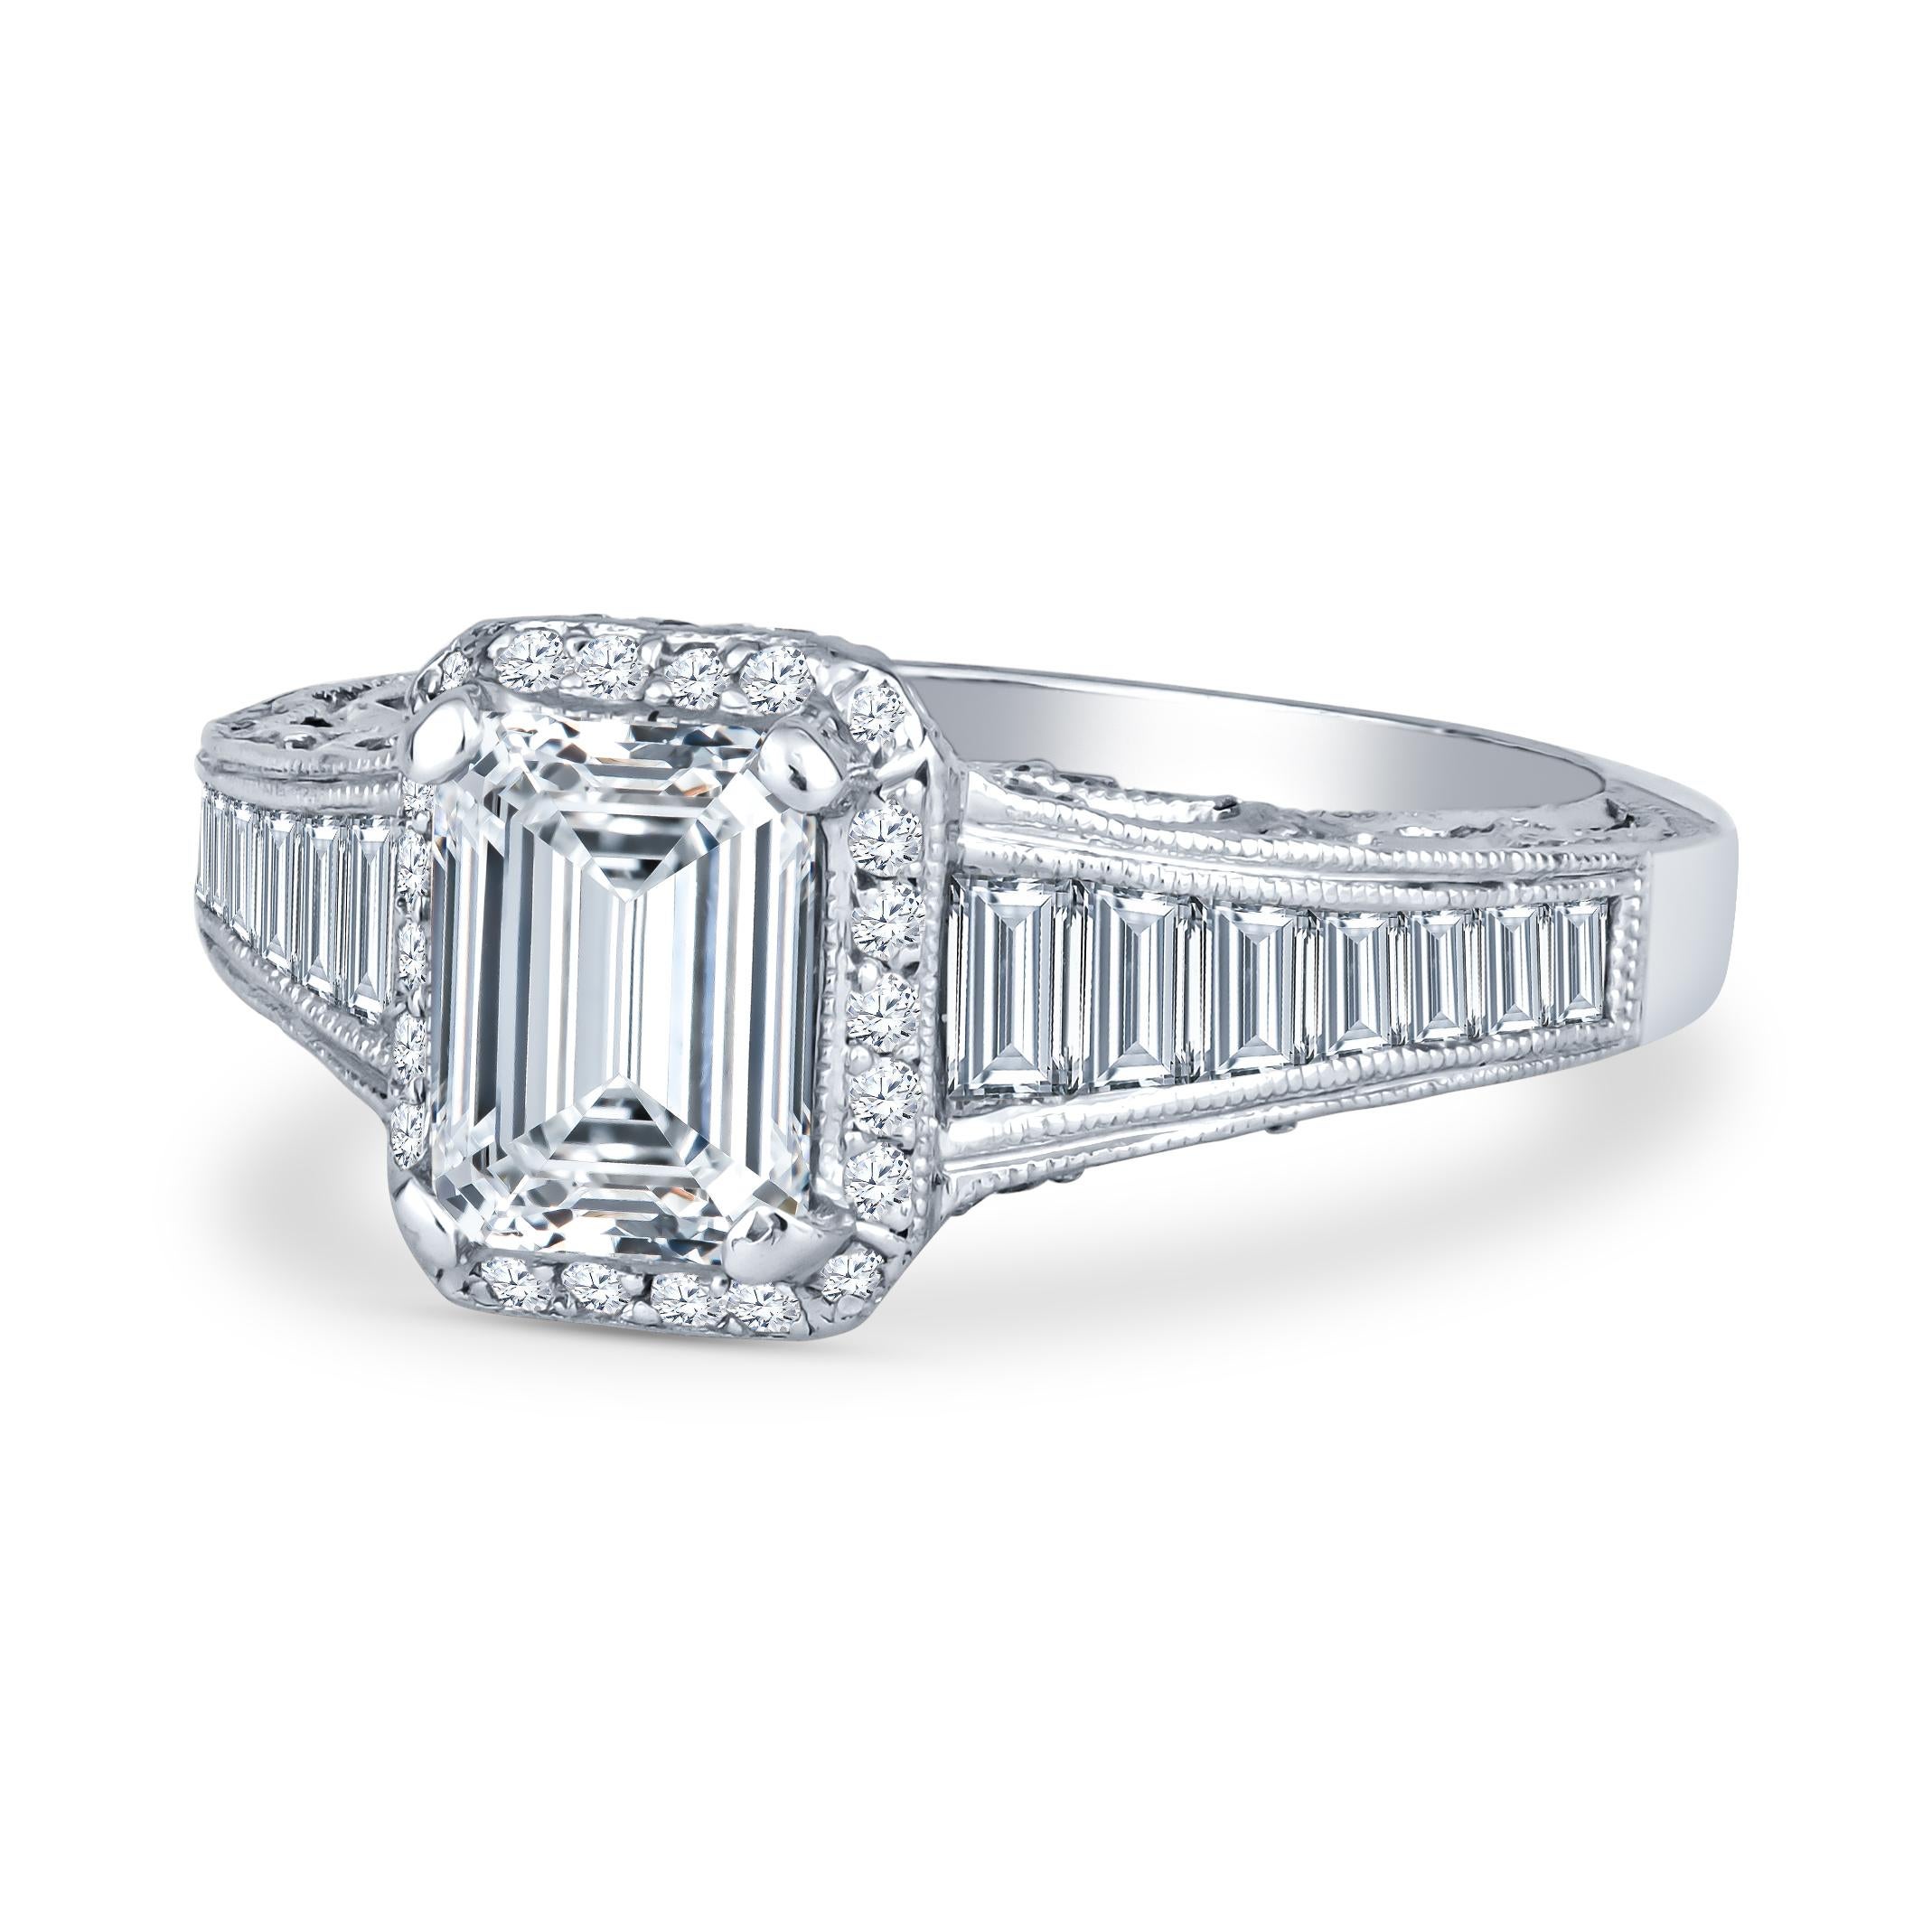 This stunning Tacori piece features a 1.01ct emerald cut diamond centerstone (I SI2, GIA Report #5202042286), accented by 1.35ct total weight in baguette and round diamond cut side diamonds. The ring itself is a platinum halo engagement ring. This